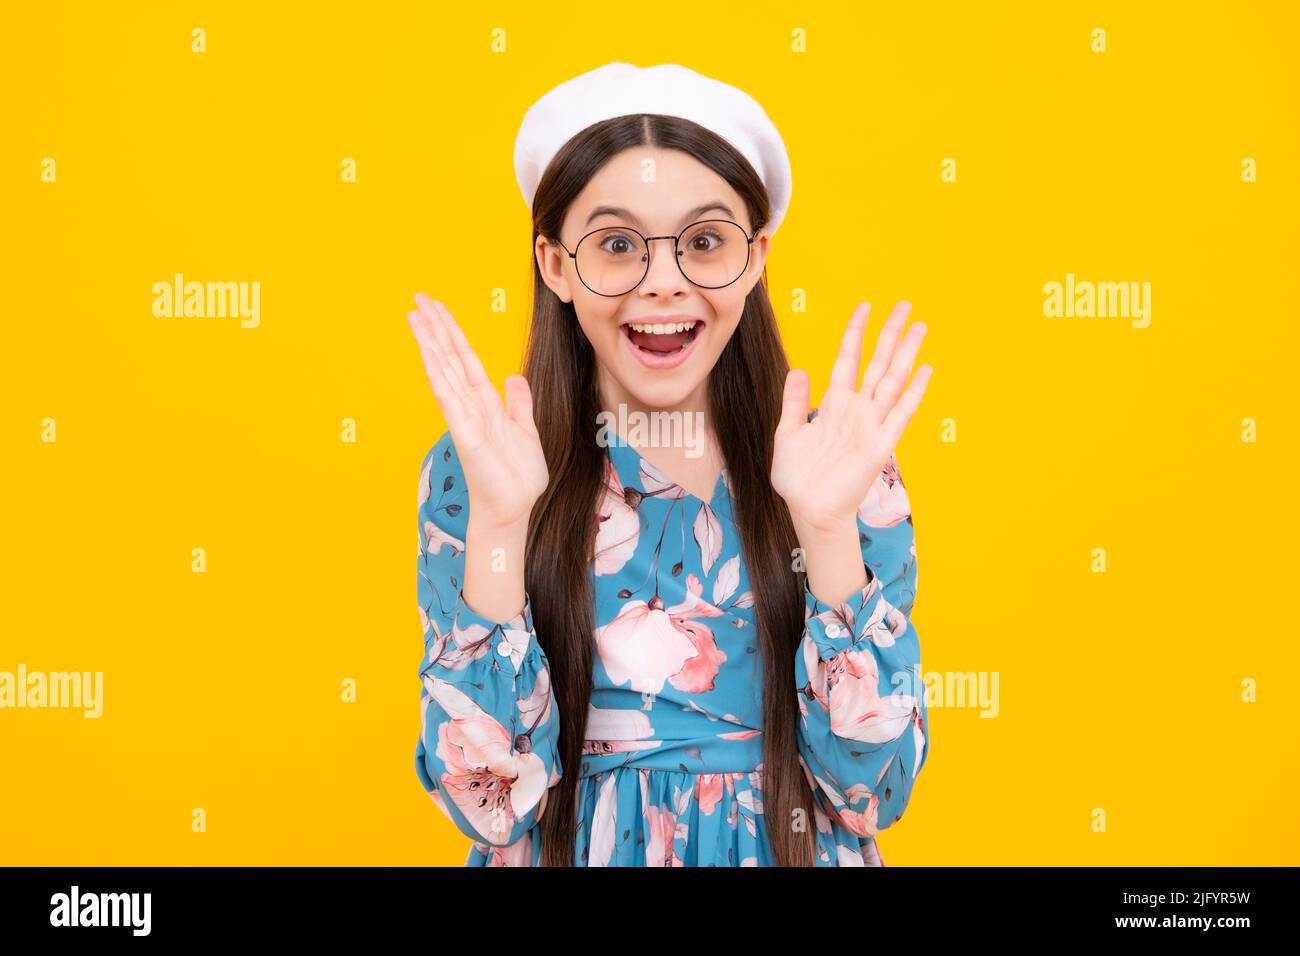 Excited kids face. Amazed expression, cheerful and glad. Amazed child with  open mouth on yellow background, surprise Stock Photo - Alamy